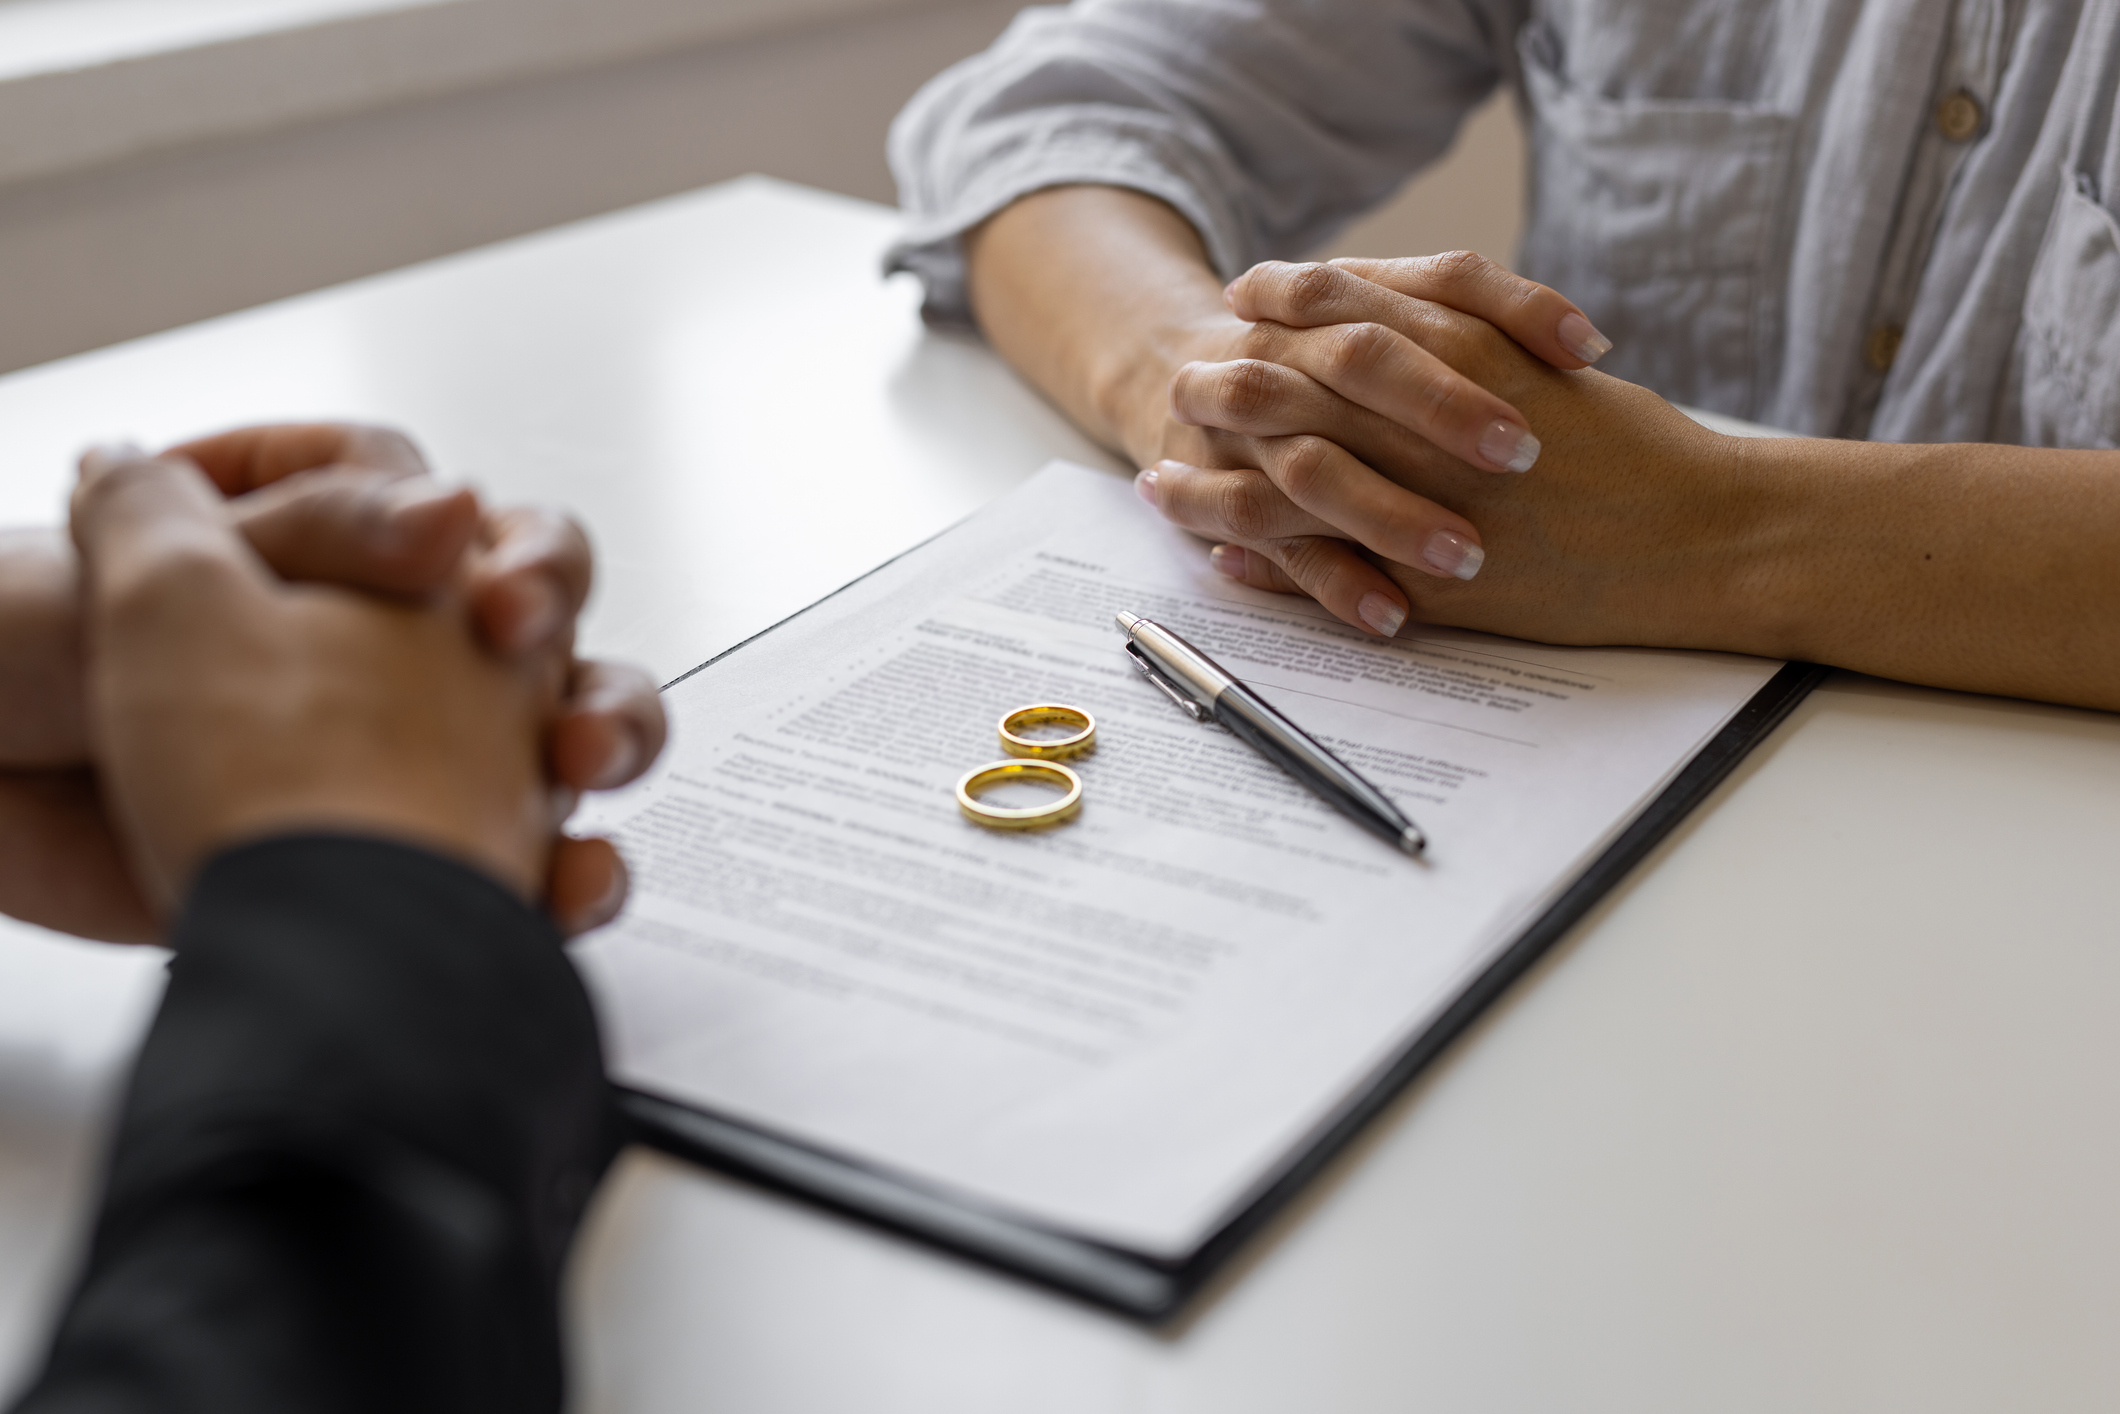 Two people sitting across from each other with their hands folded near wedding rings and documents on a table